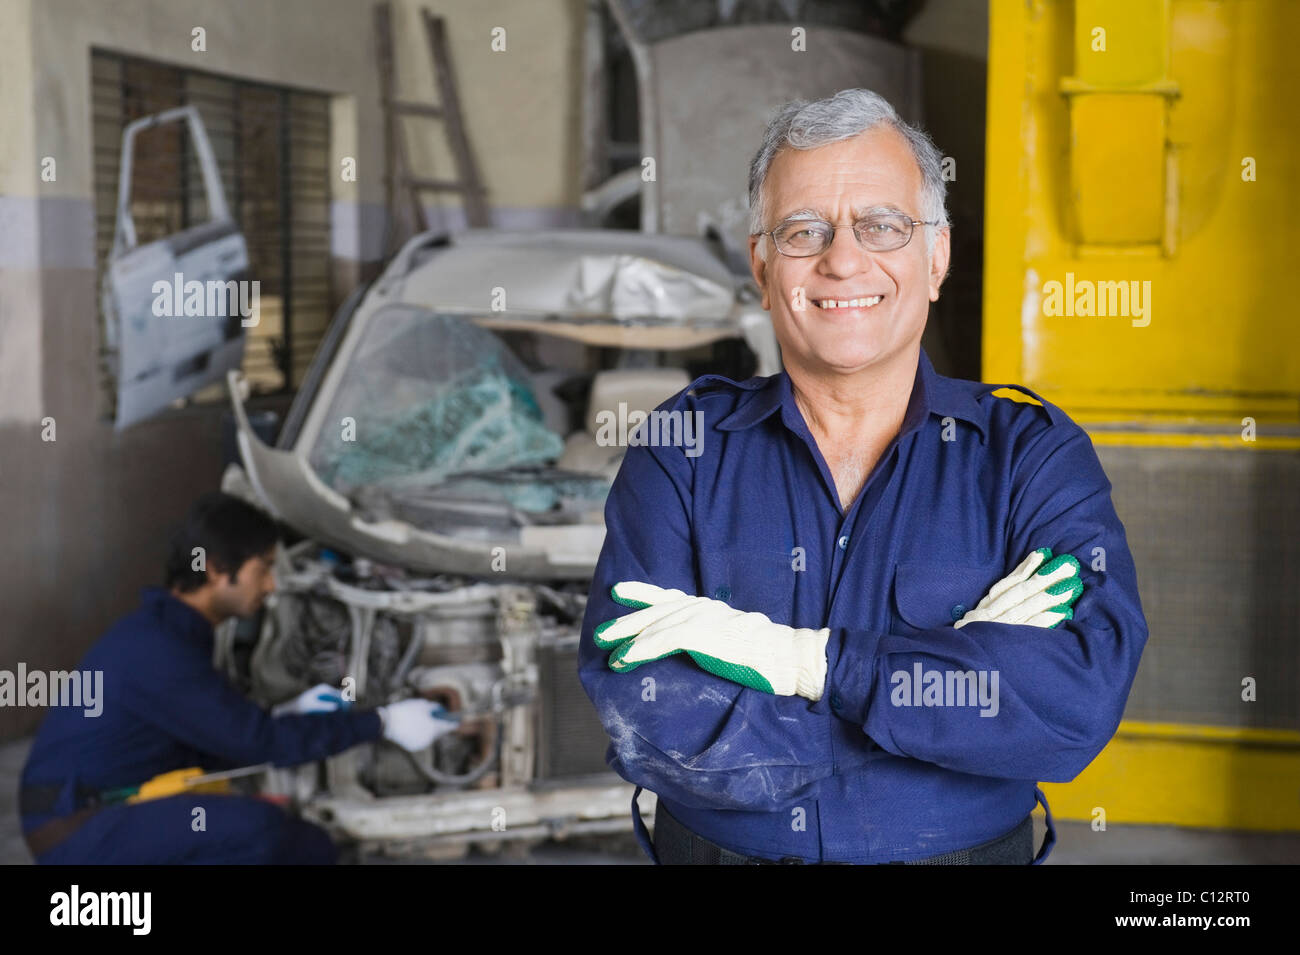 Portrait of an auto mechanic smiling with an apprentice repairing a car in the background Stock Photo